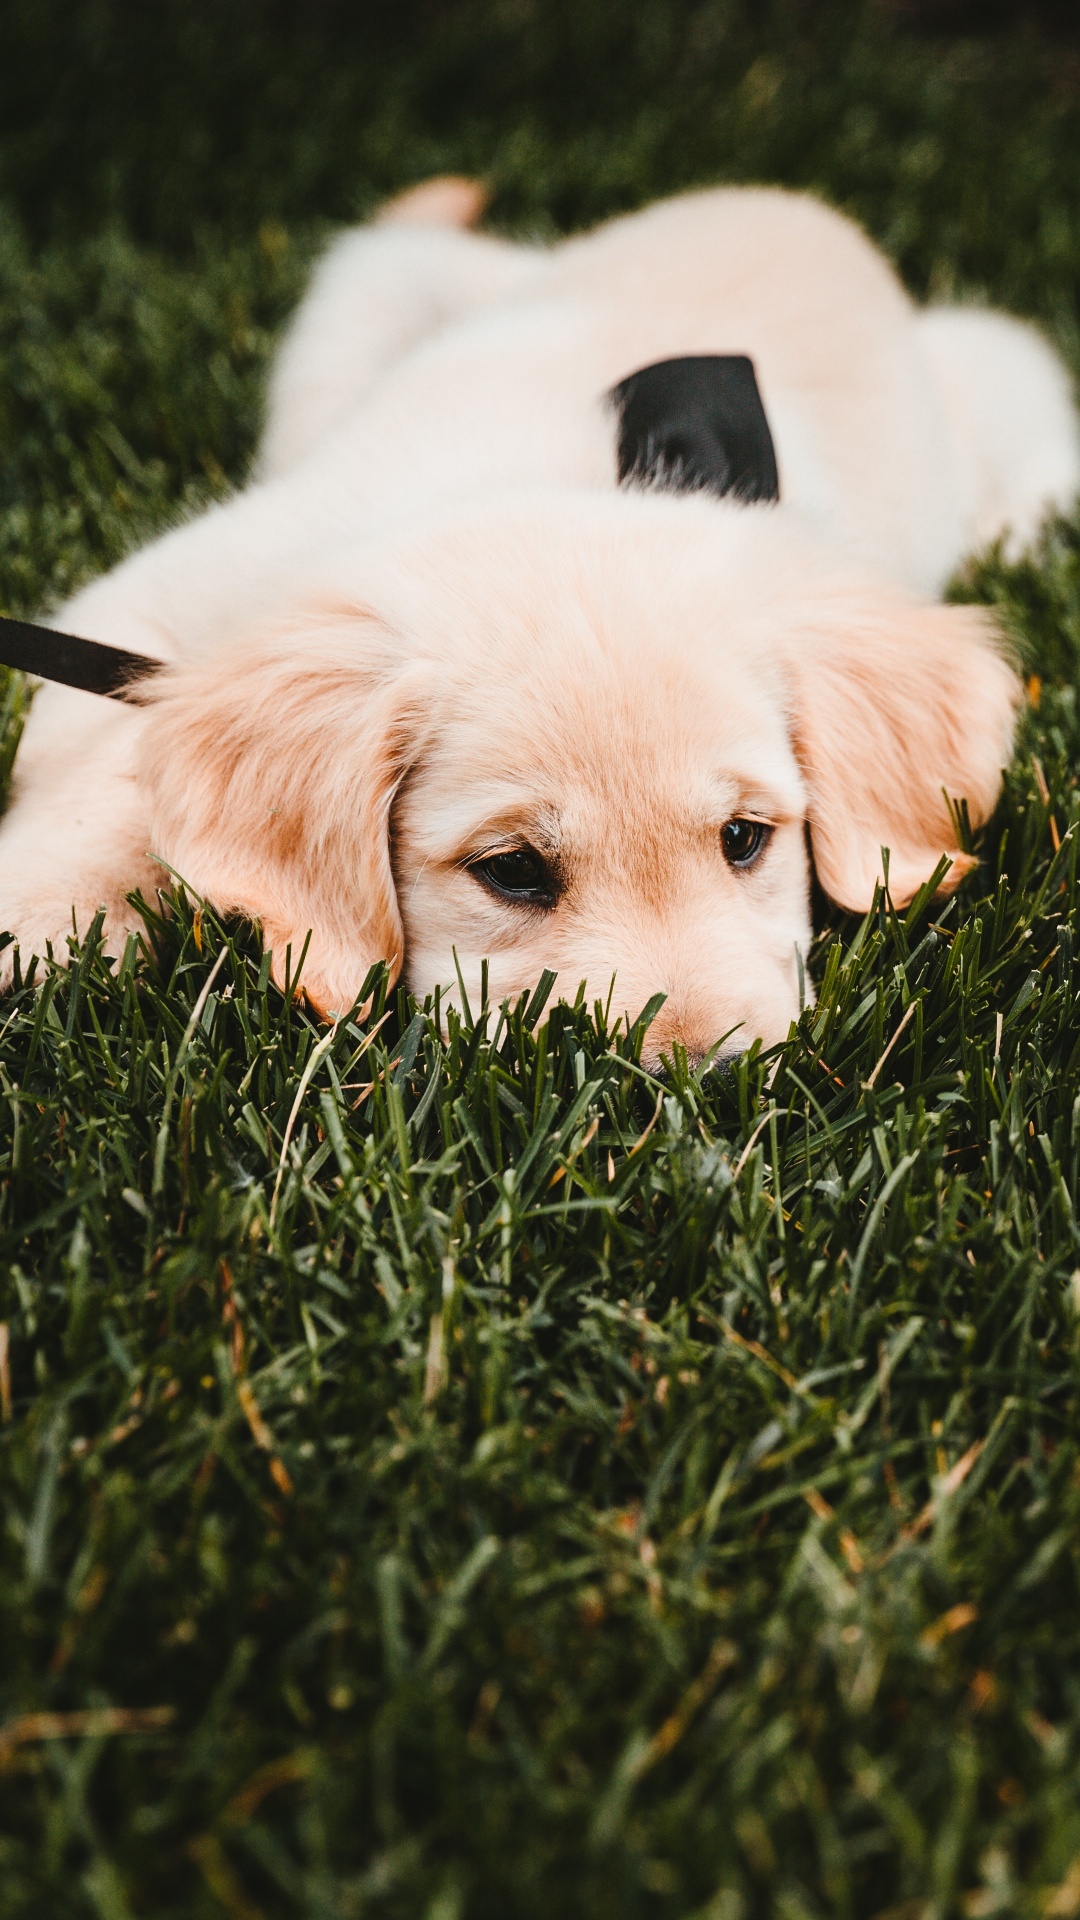 White Short Coated Dog Lying on Green Grass Field During Daytime. Wallpaper in 1080x1920 Resolution